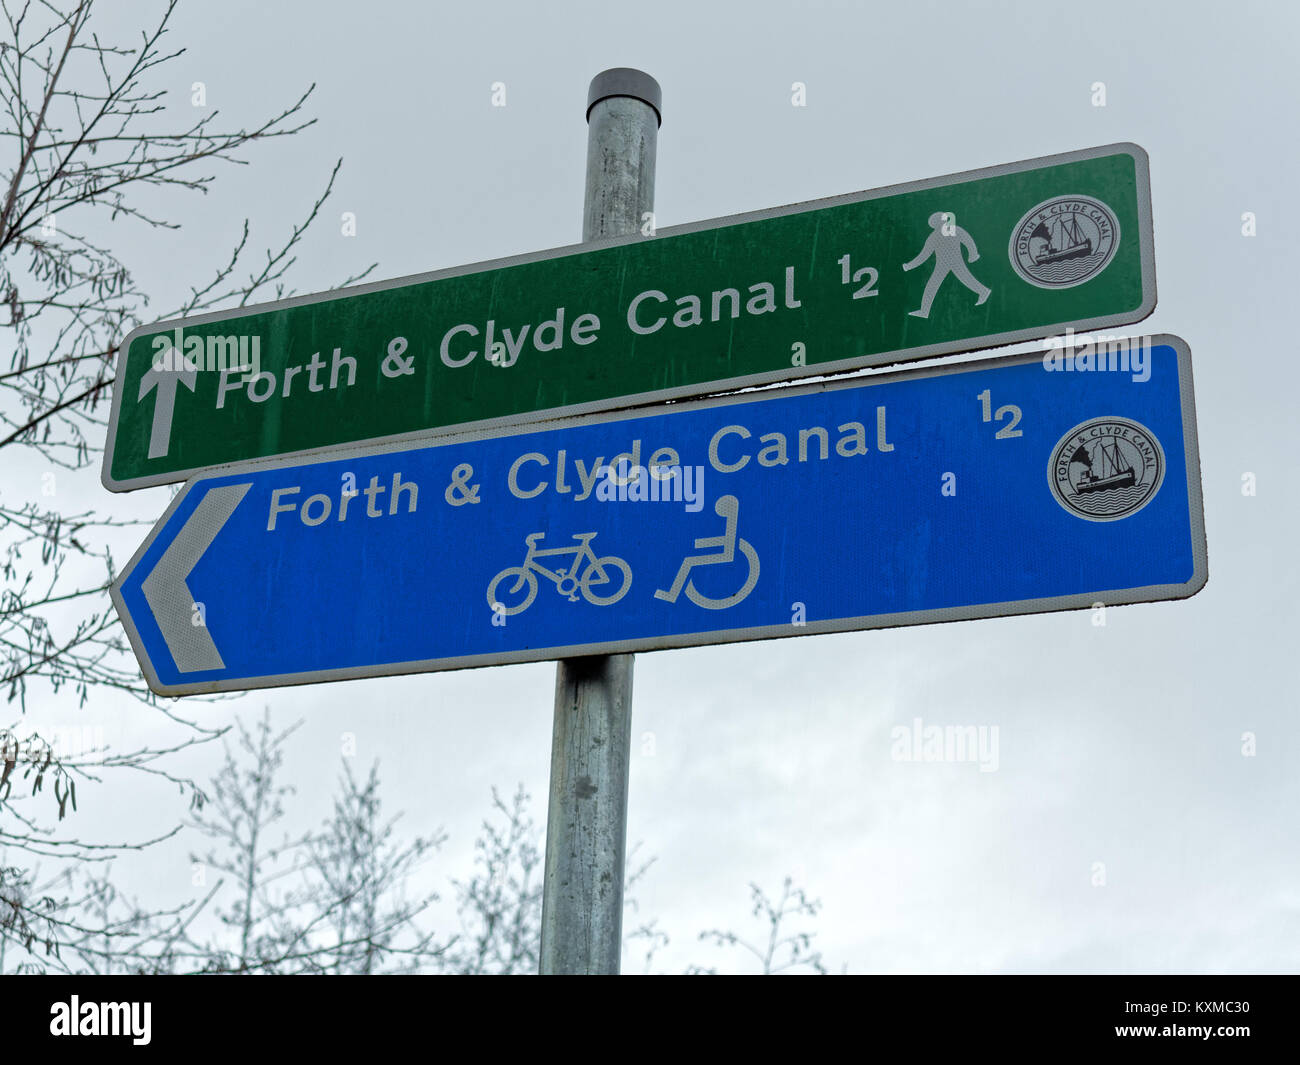 forth and clyde canal sign  blue green pointing arrow distance walking bicycle bike wheelchair disabled access Stock Photo